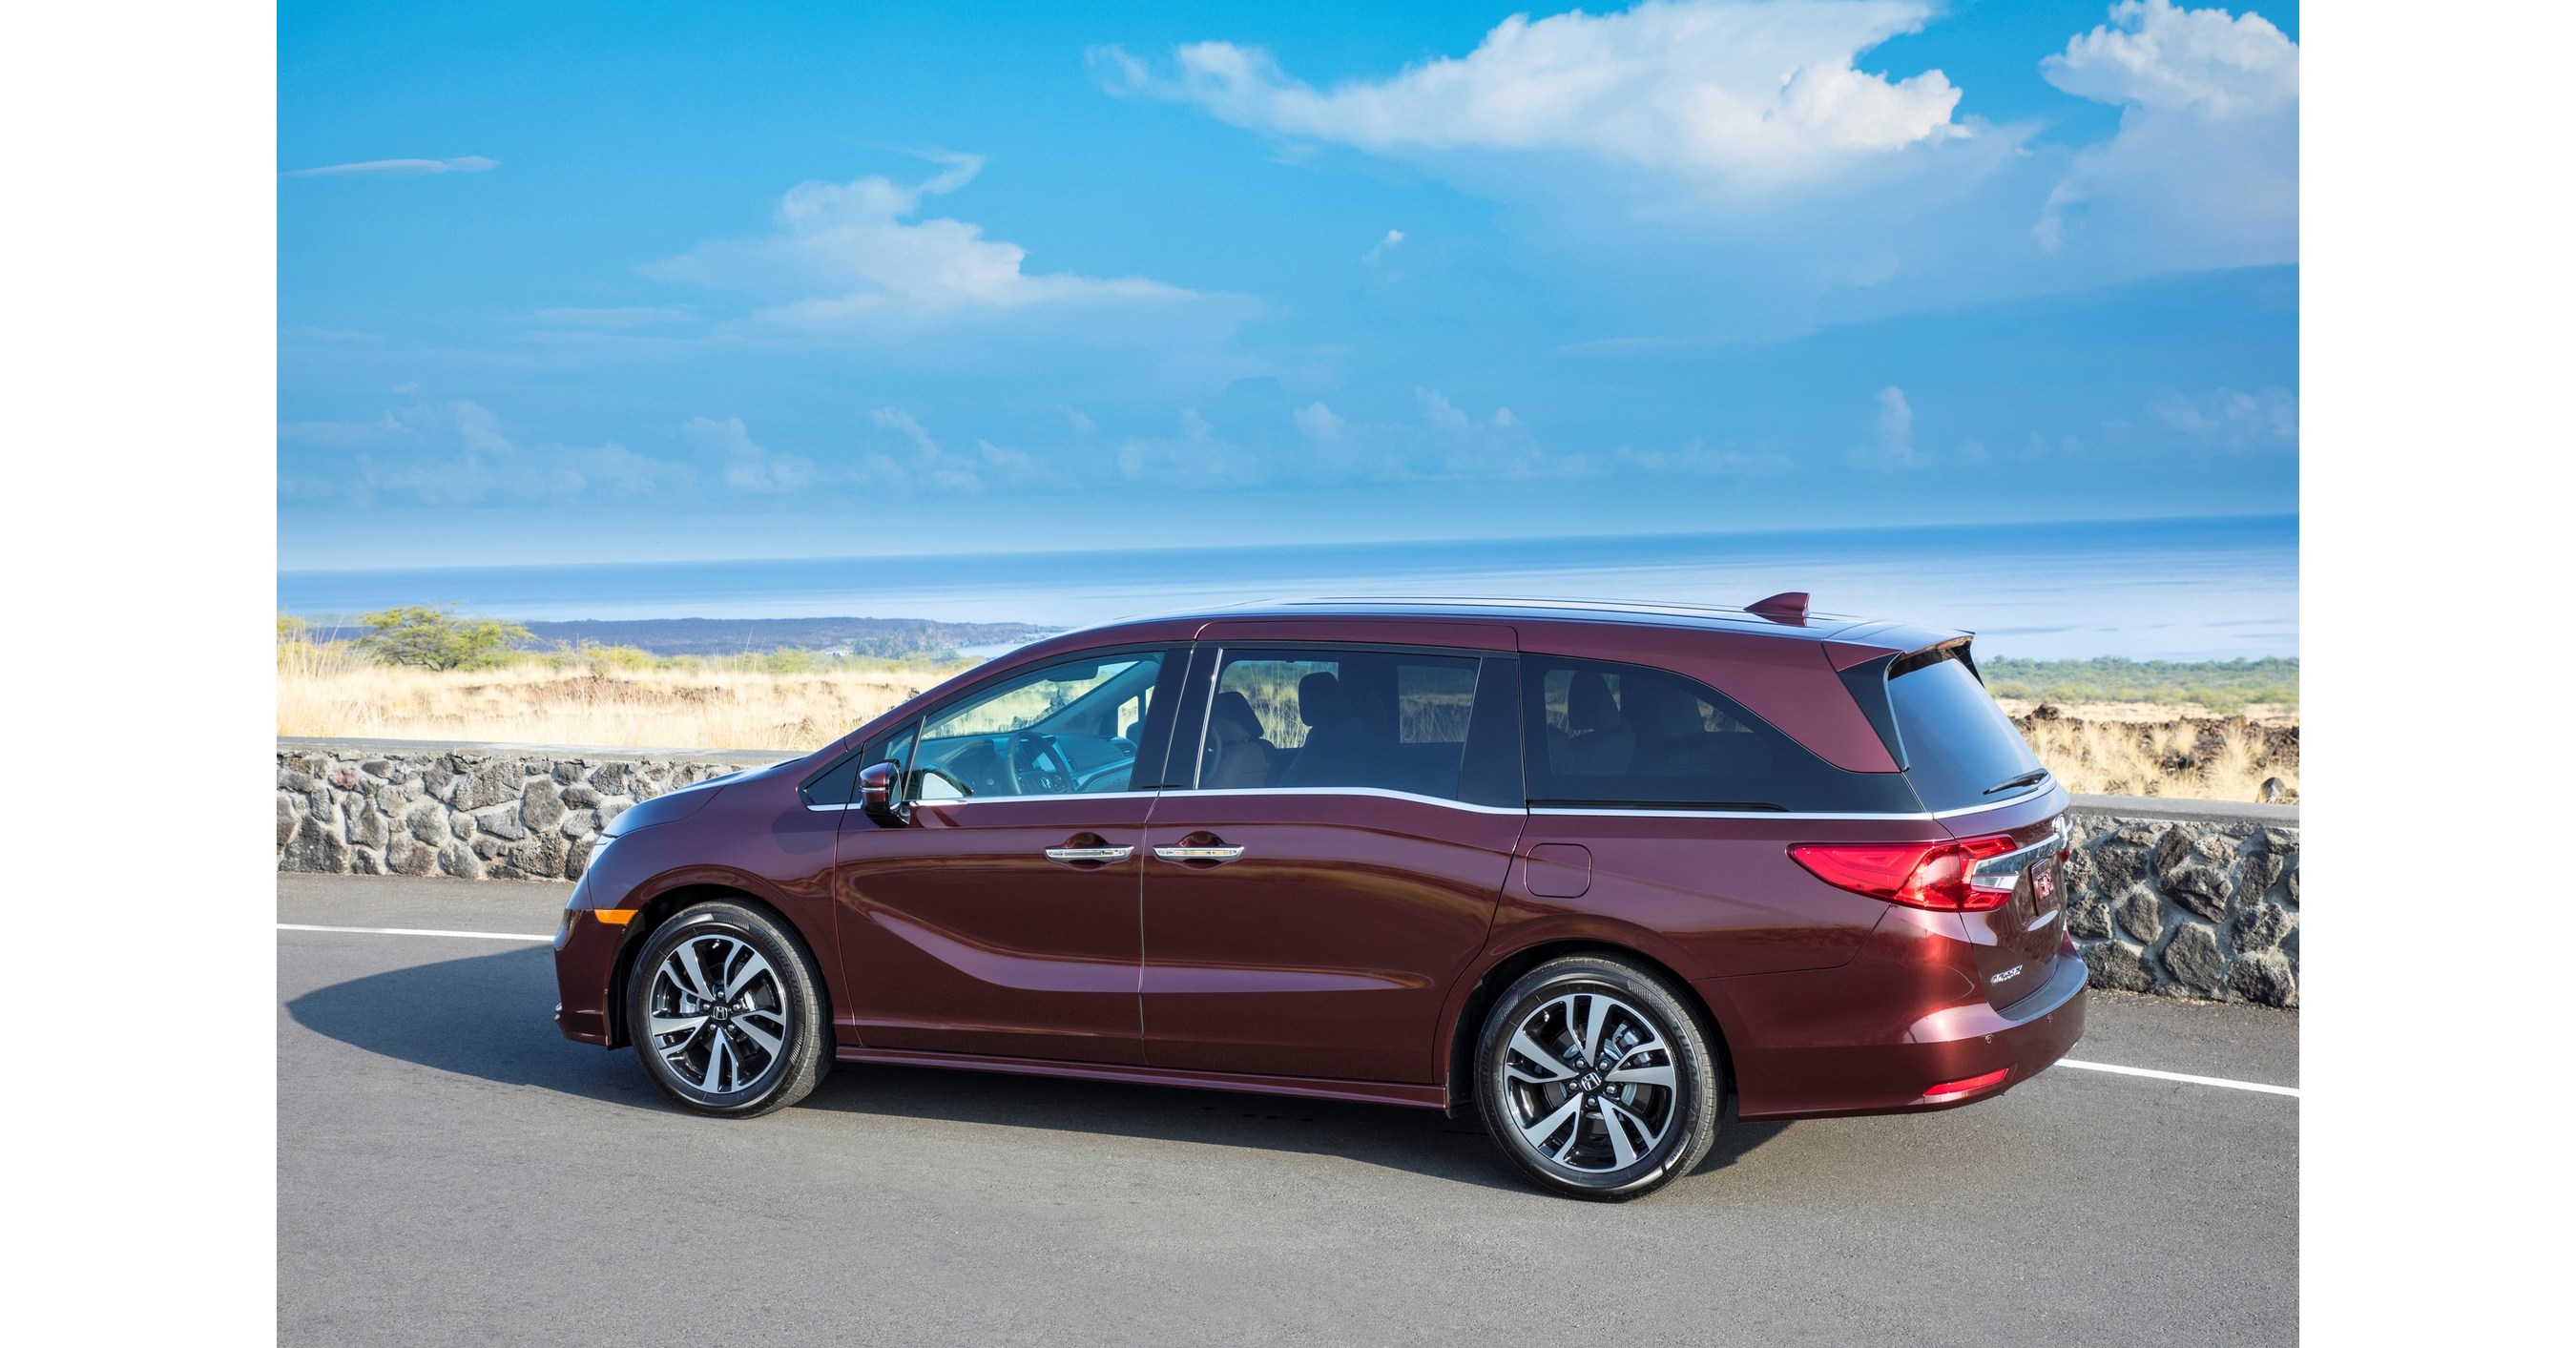 The best cars for people with disabilities - Honda Odyssey Comfort and Safety Features for People with Disabilities